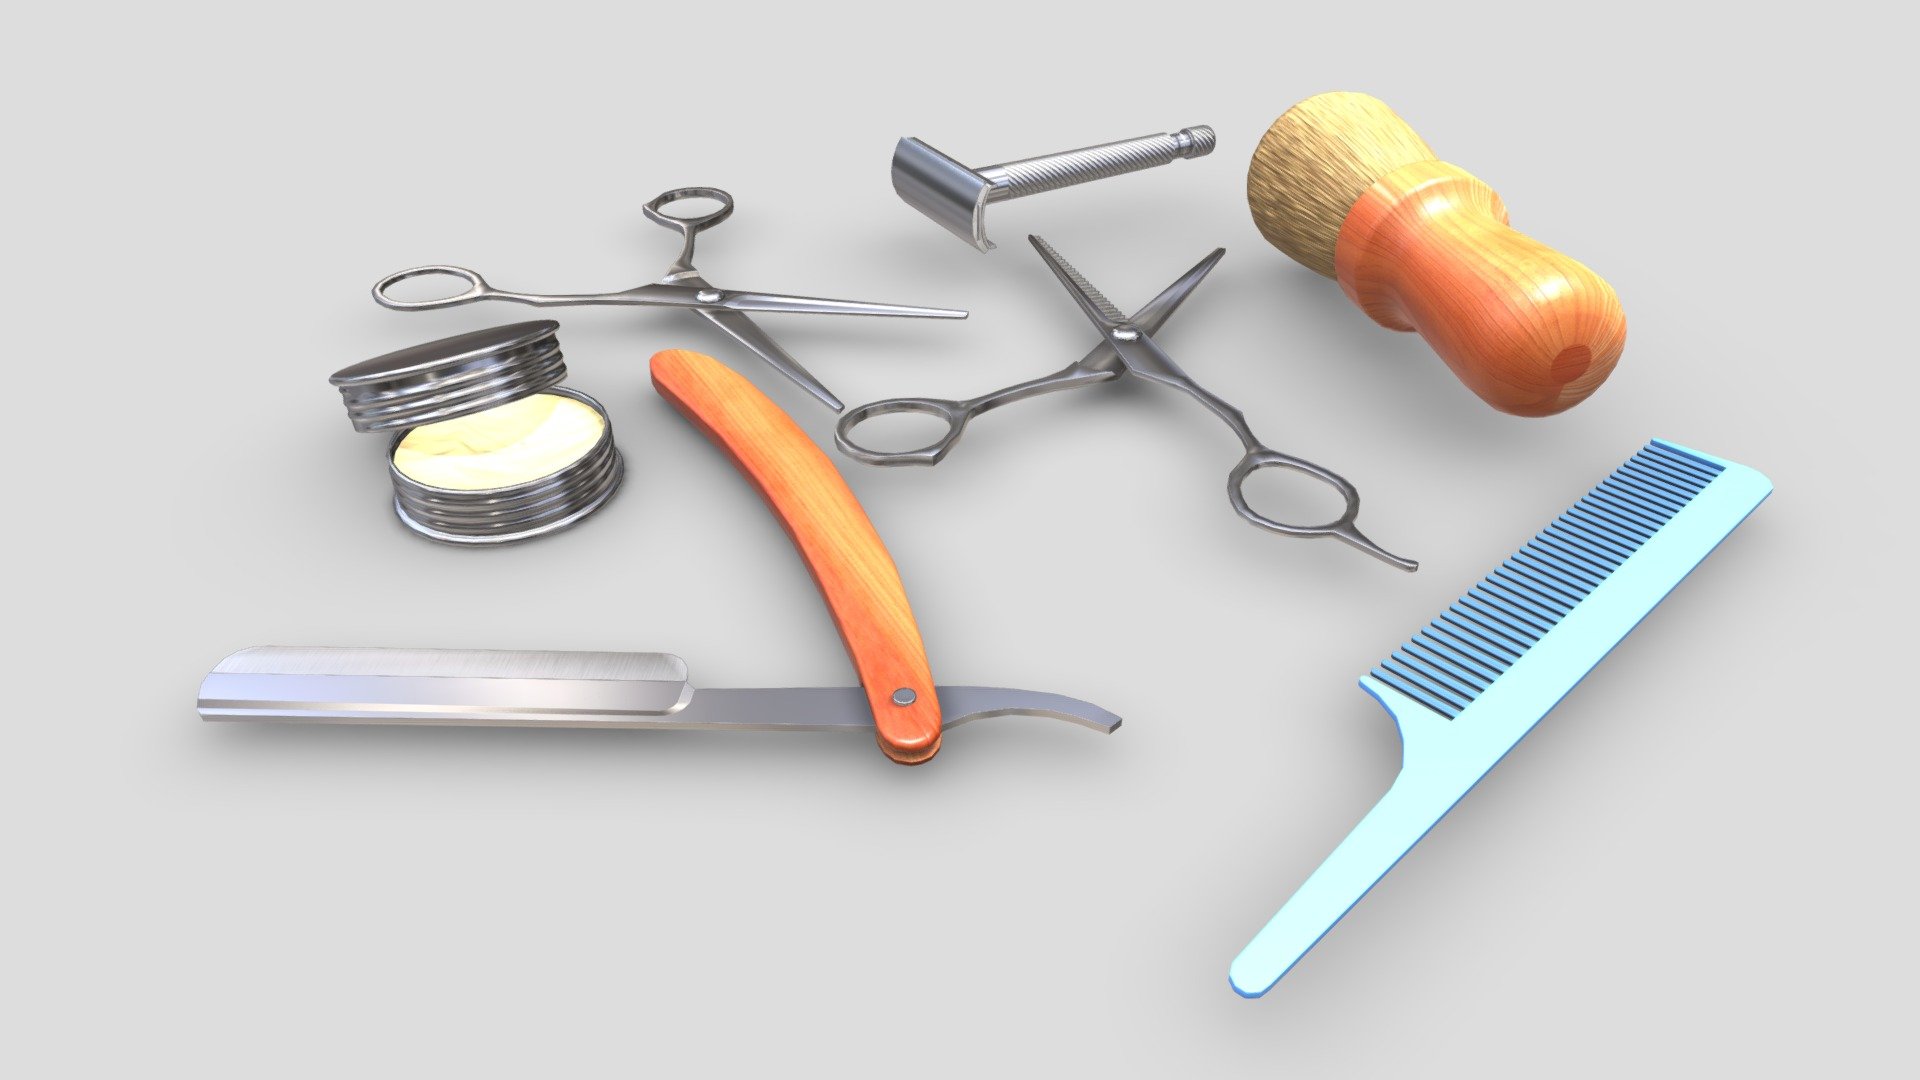 Barber tools 3D Model by ChakkitPP.


This model was developed in Blender 2.90.1
Unwrapped Non-overlapping and UV Mapping
Beveled Smooth Edges, No Subdivision modifier.

No Plugins used.



High Quality 3D Model.


High Resolution Textures.

Objects Detail : 


Shaving brush Polygons 675 / Vertices 720
Comb Polygons 1148 / Vertices 1453
Straight Razor Polygons 794 / Vertices 830
Wax Polygons 3276 / Vertices 3193 
Scissors Polygons 1322 / Vertices 2620    
Sigle Thinning Scissors Polygons 2782 / Vertices 2466 
Shaving Polygons 1624 / Vertices 1565

Textures Detail :


2K PBR textures : Base Color / Height / Metallic / Normal / Roughness / AO

File Includes : 


fbx, obj / mtl, stl, blend
 - Barber Tool - Buy Royalty Free 3D model by ChakkitPP 3d model